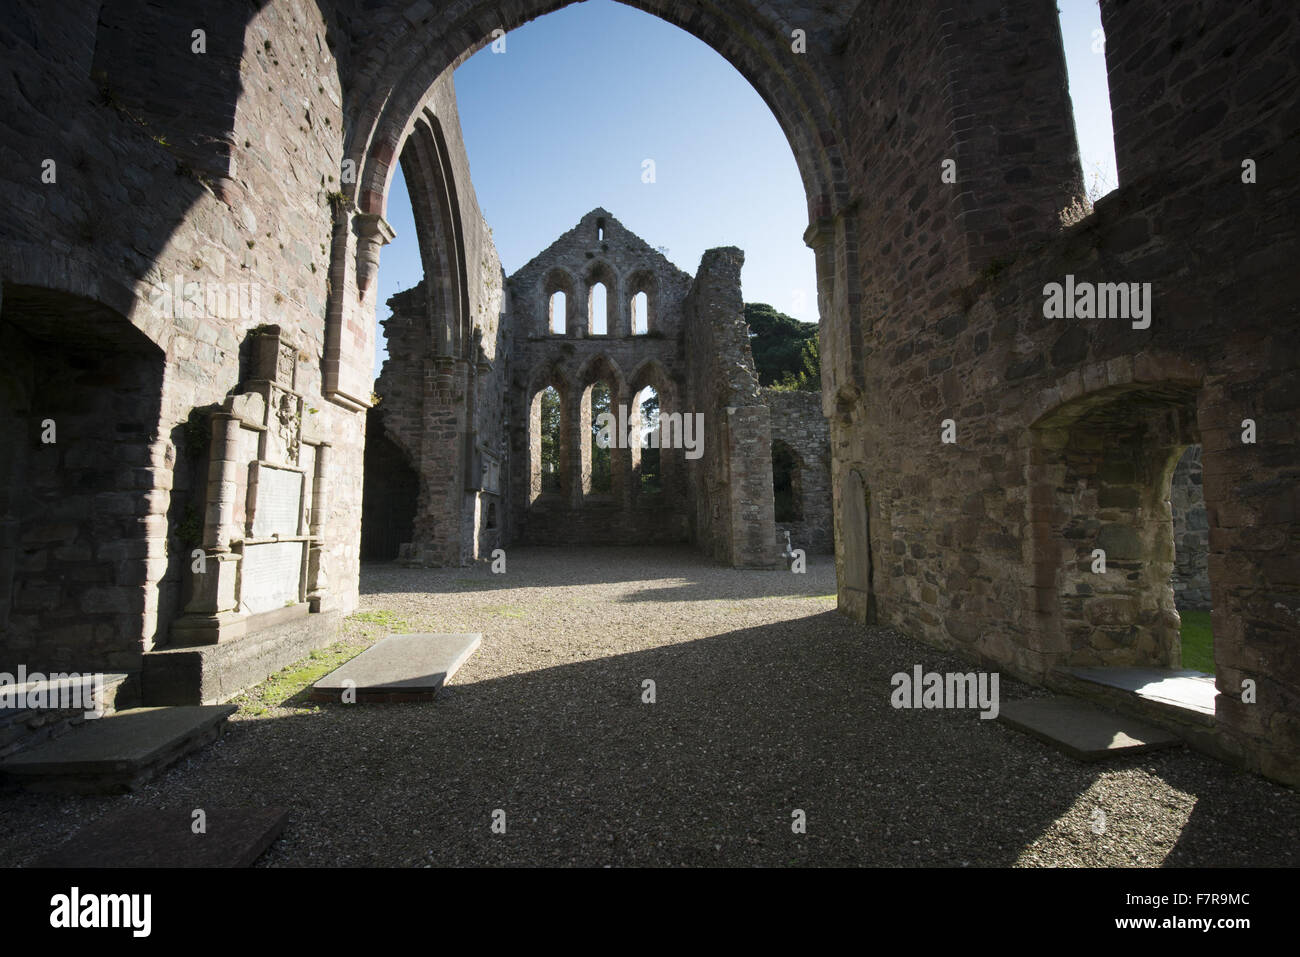 Grey Abbey, County Down. Grey Abbey is a ruined Cistercian priory in the village of Greyabbey. NOT NT LAND. Stock Photo